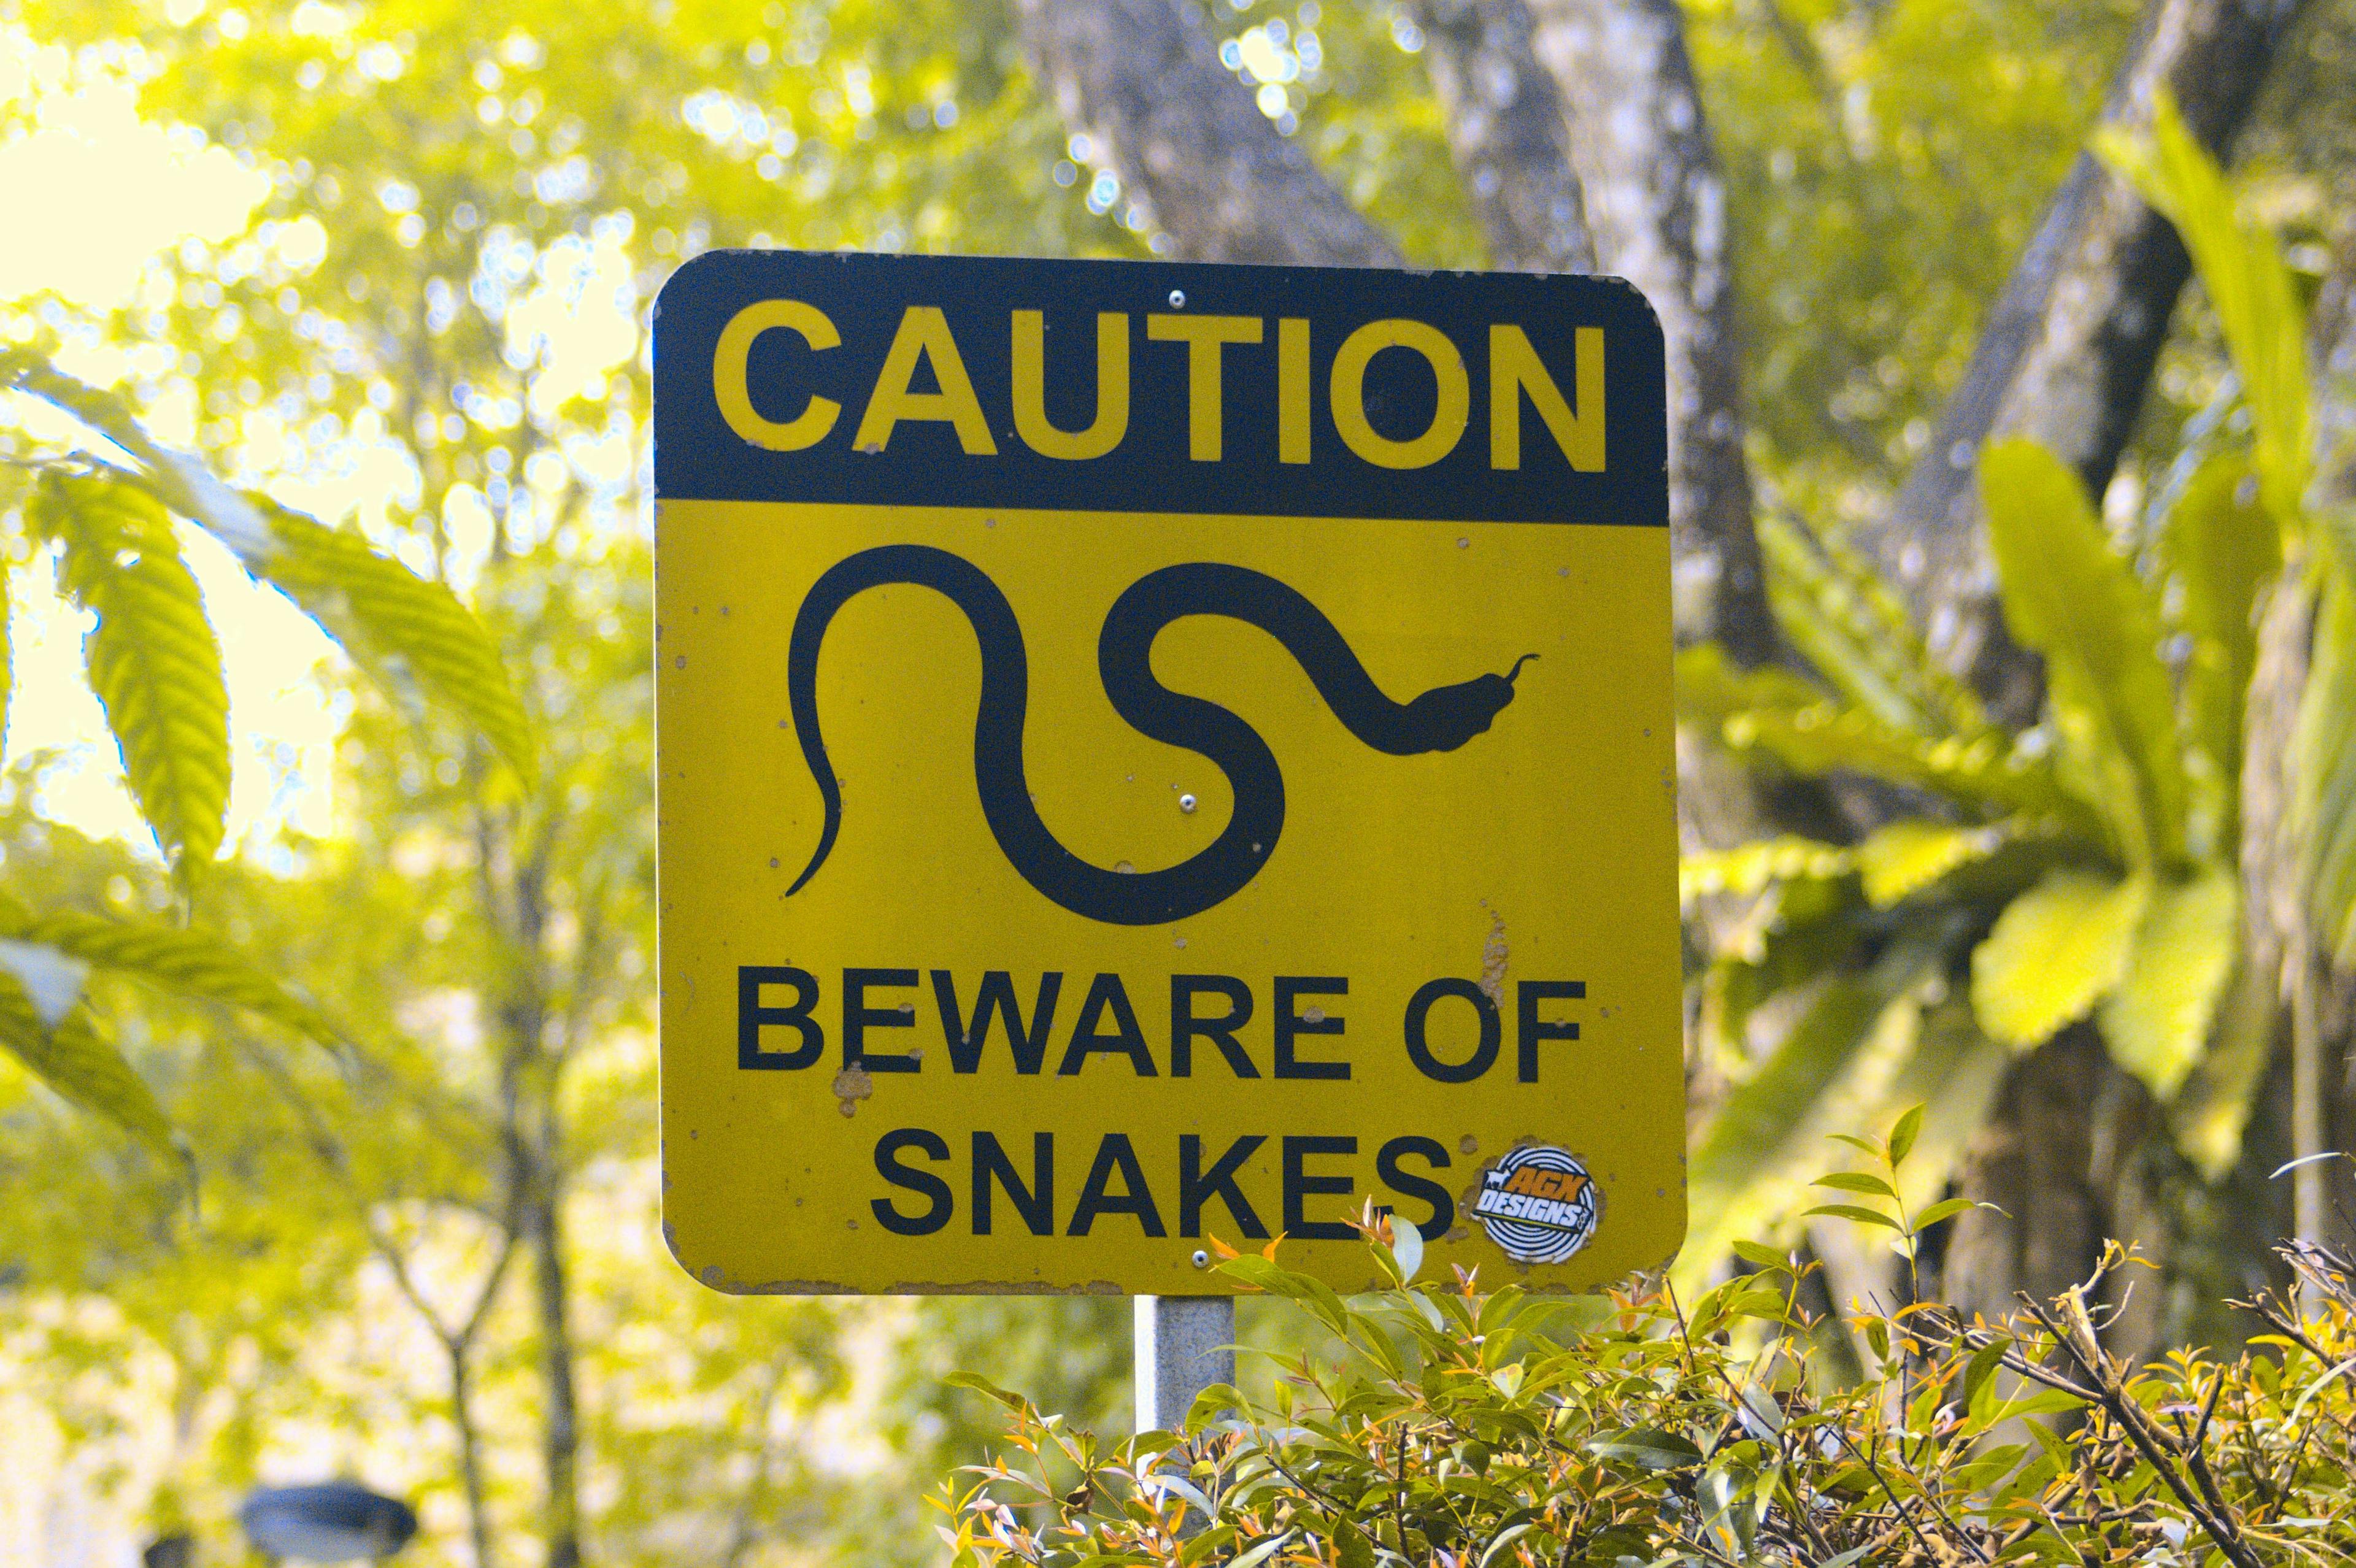 Beware of Snakes caution sign